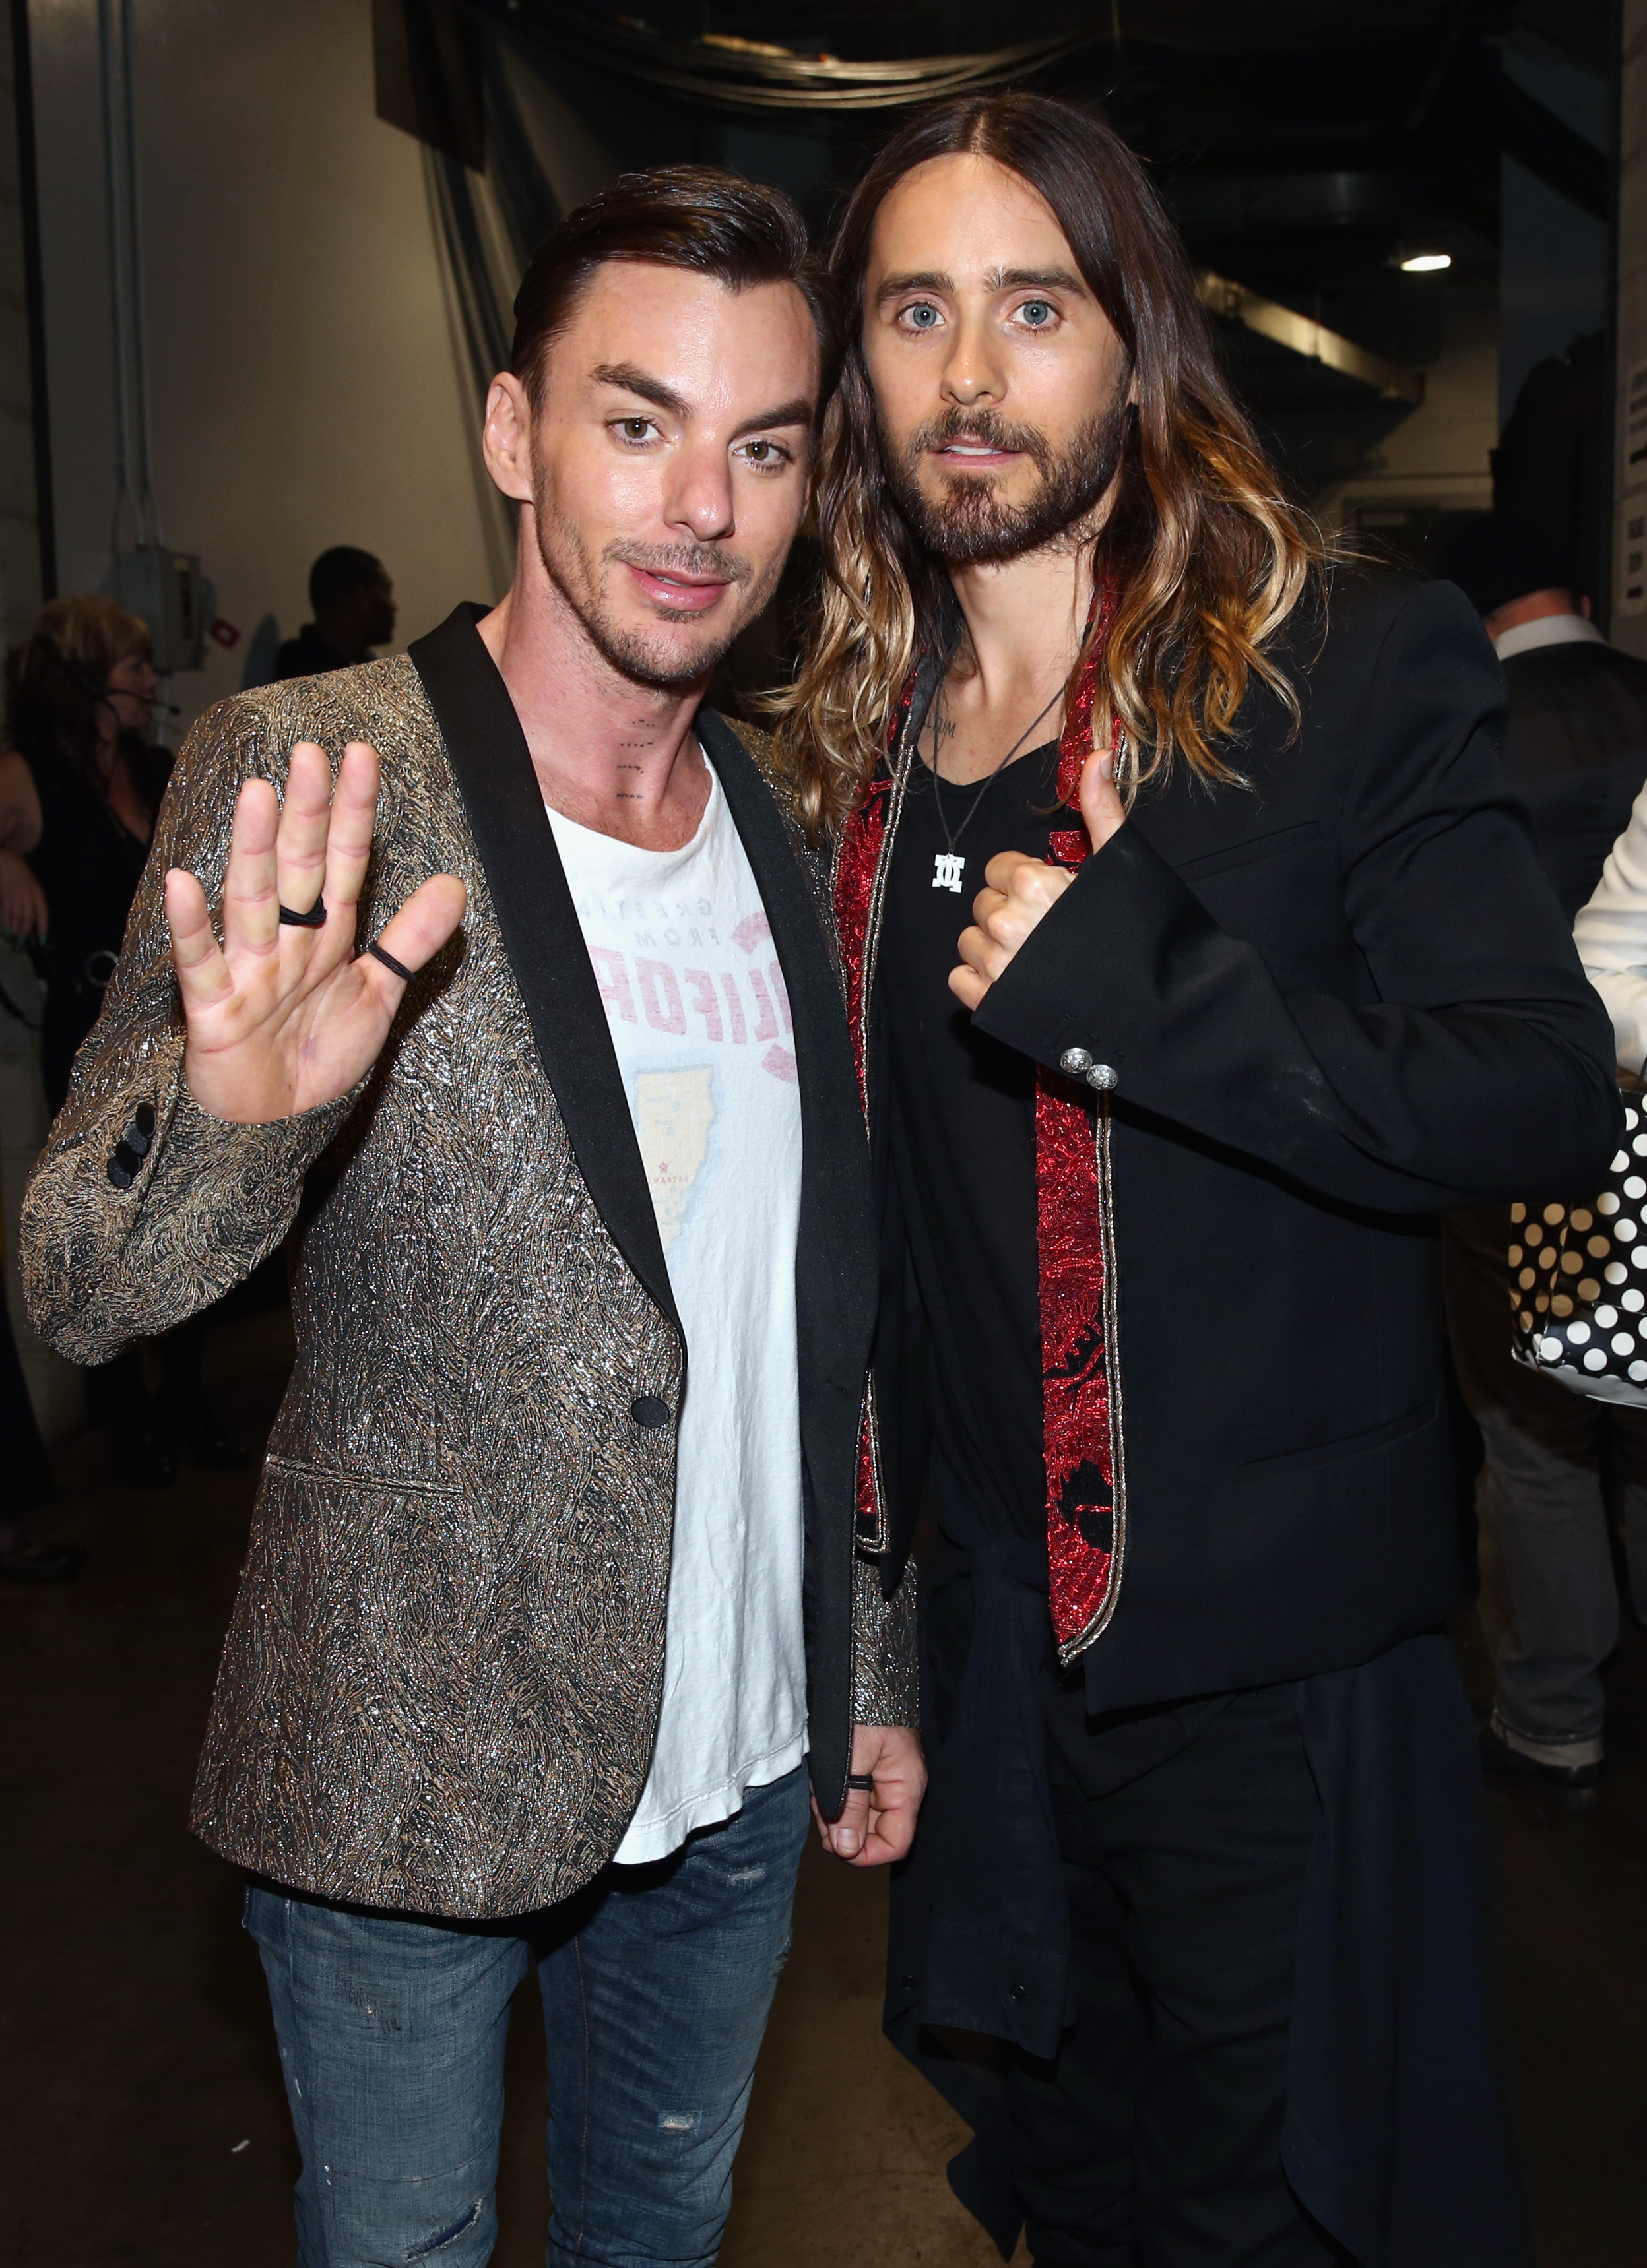 Jared Leto's older brother Shannon Leto has formed the Black Fuel Trading Company